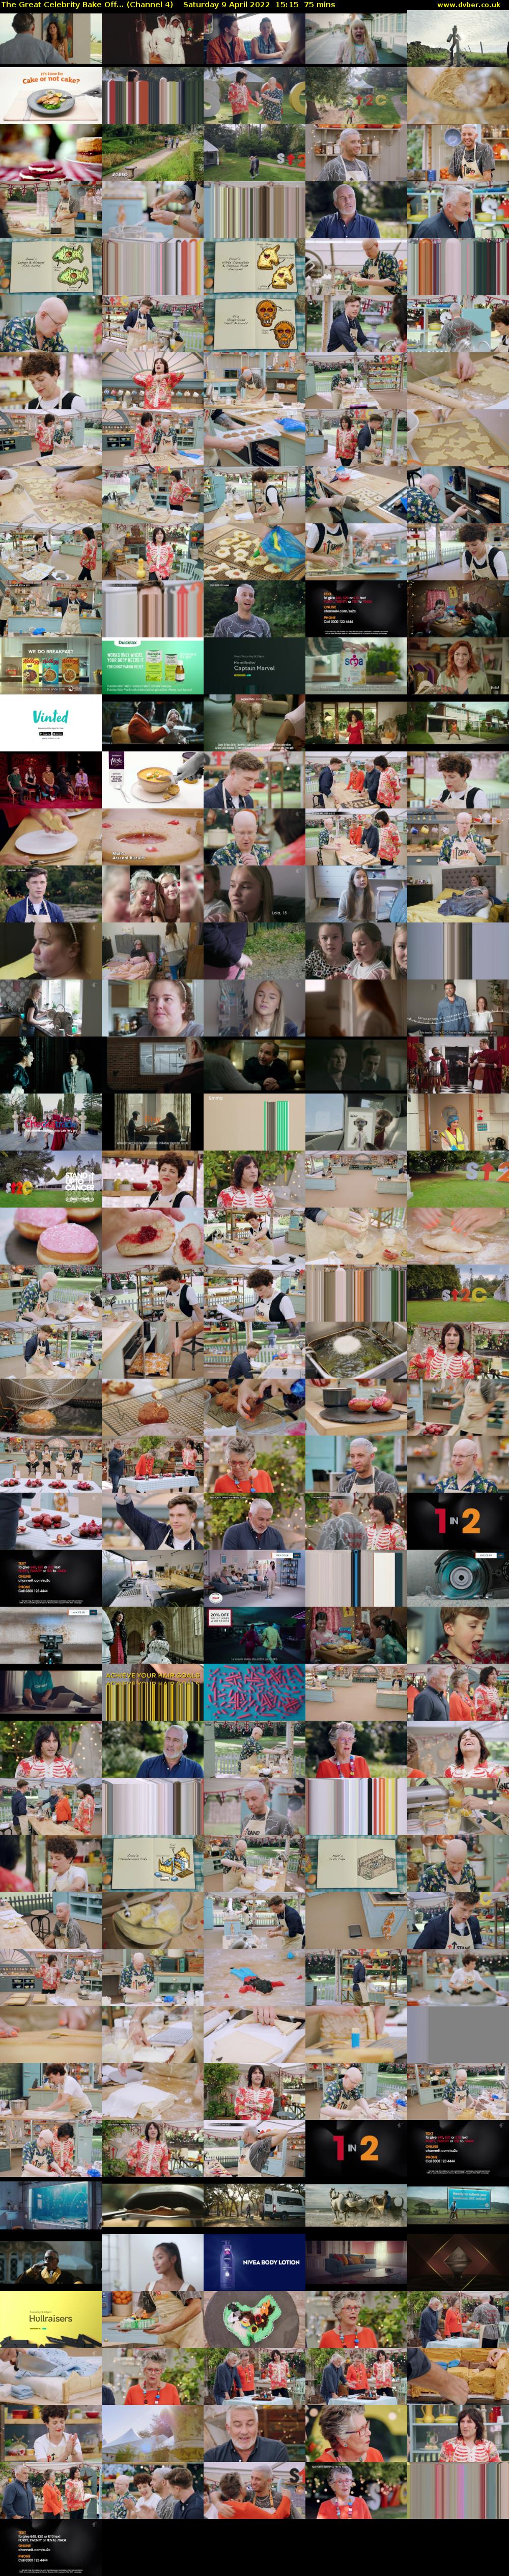 The Great Celebrity Bake Off... (Channel 4) Saturday 9 April 2022 15:15 - 16:30